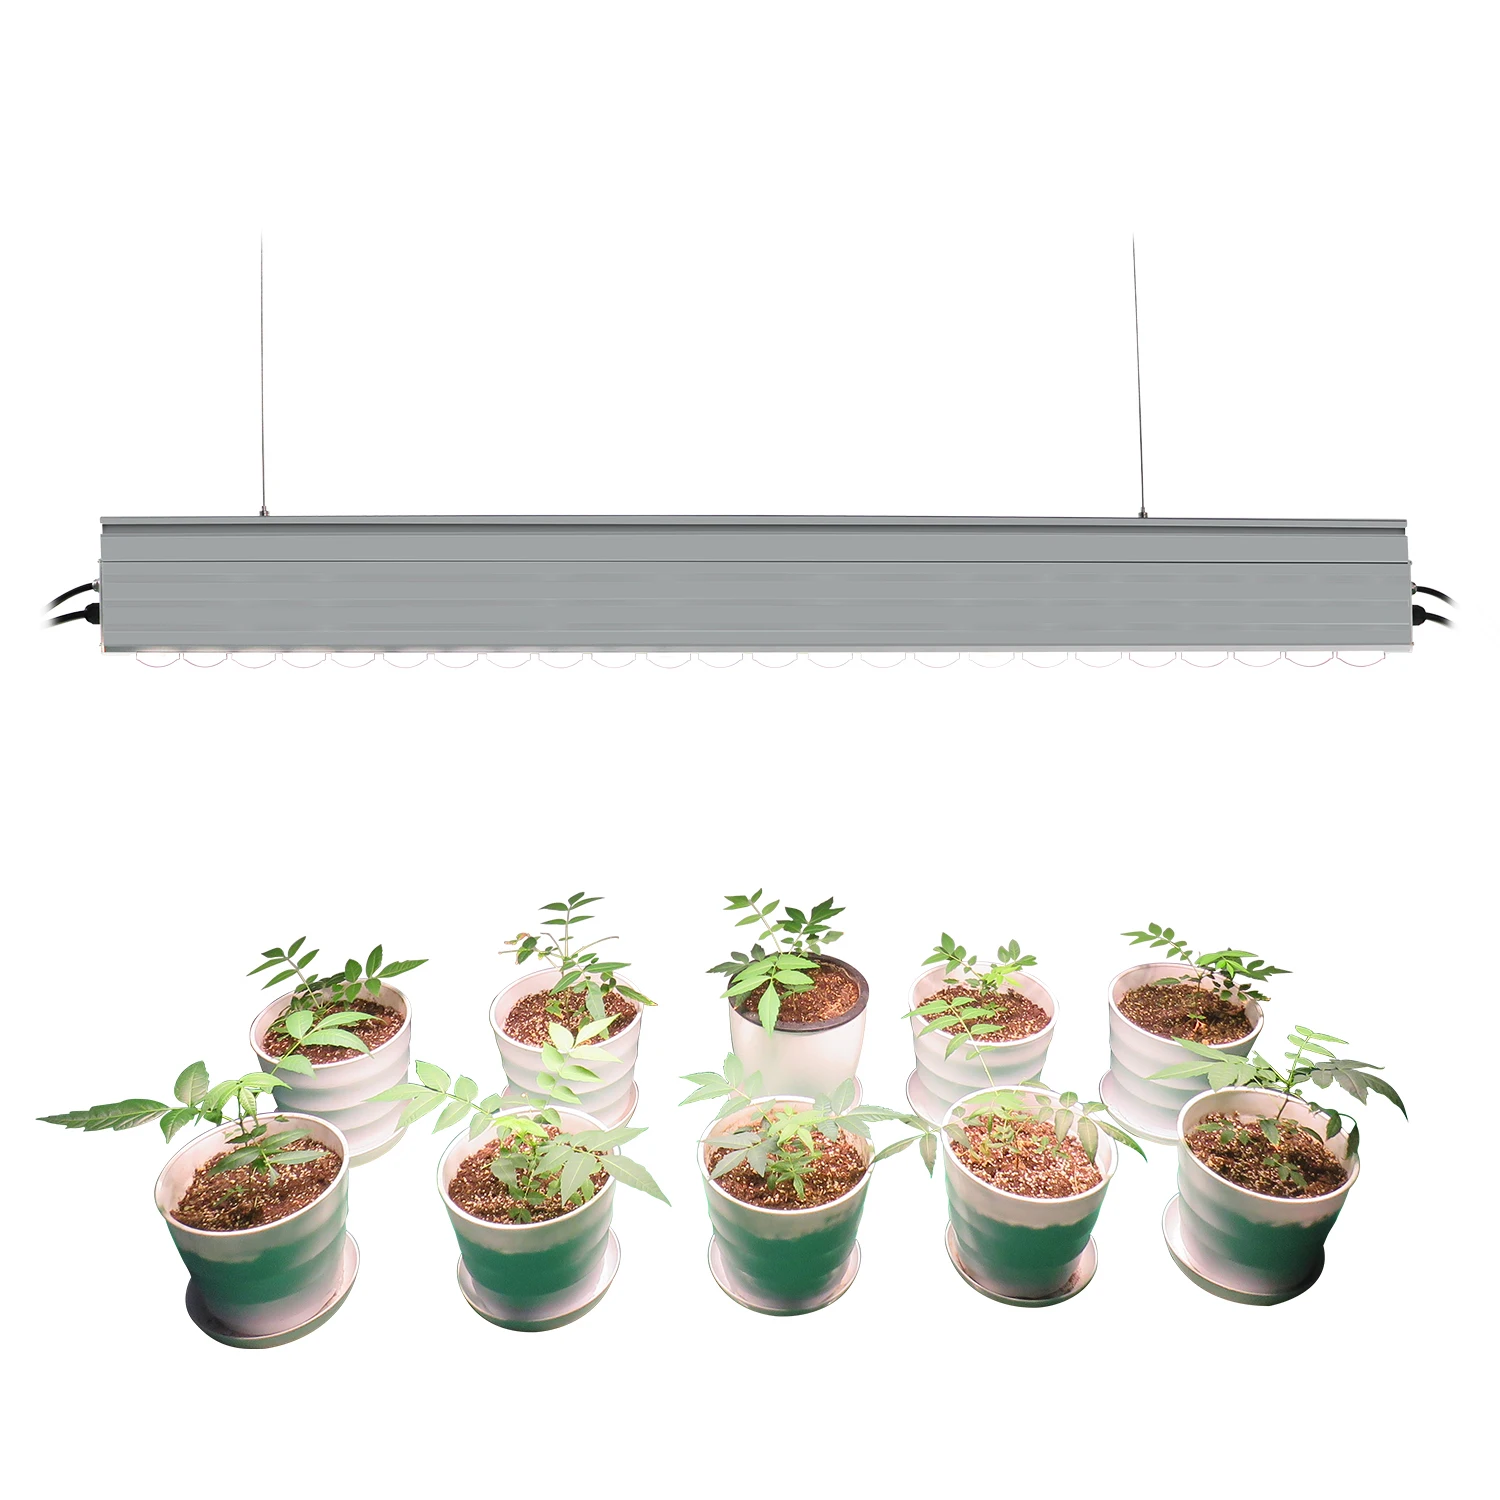 NEW LED Grow Light Bar lettuce True Wattage 45w 200W With Full Spectrum for Medical Cultivation replace T5 Bar Tube